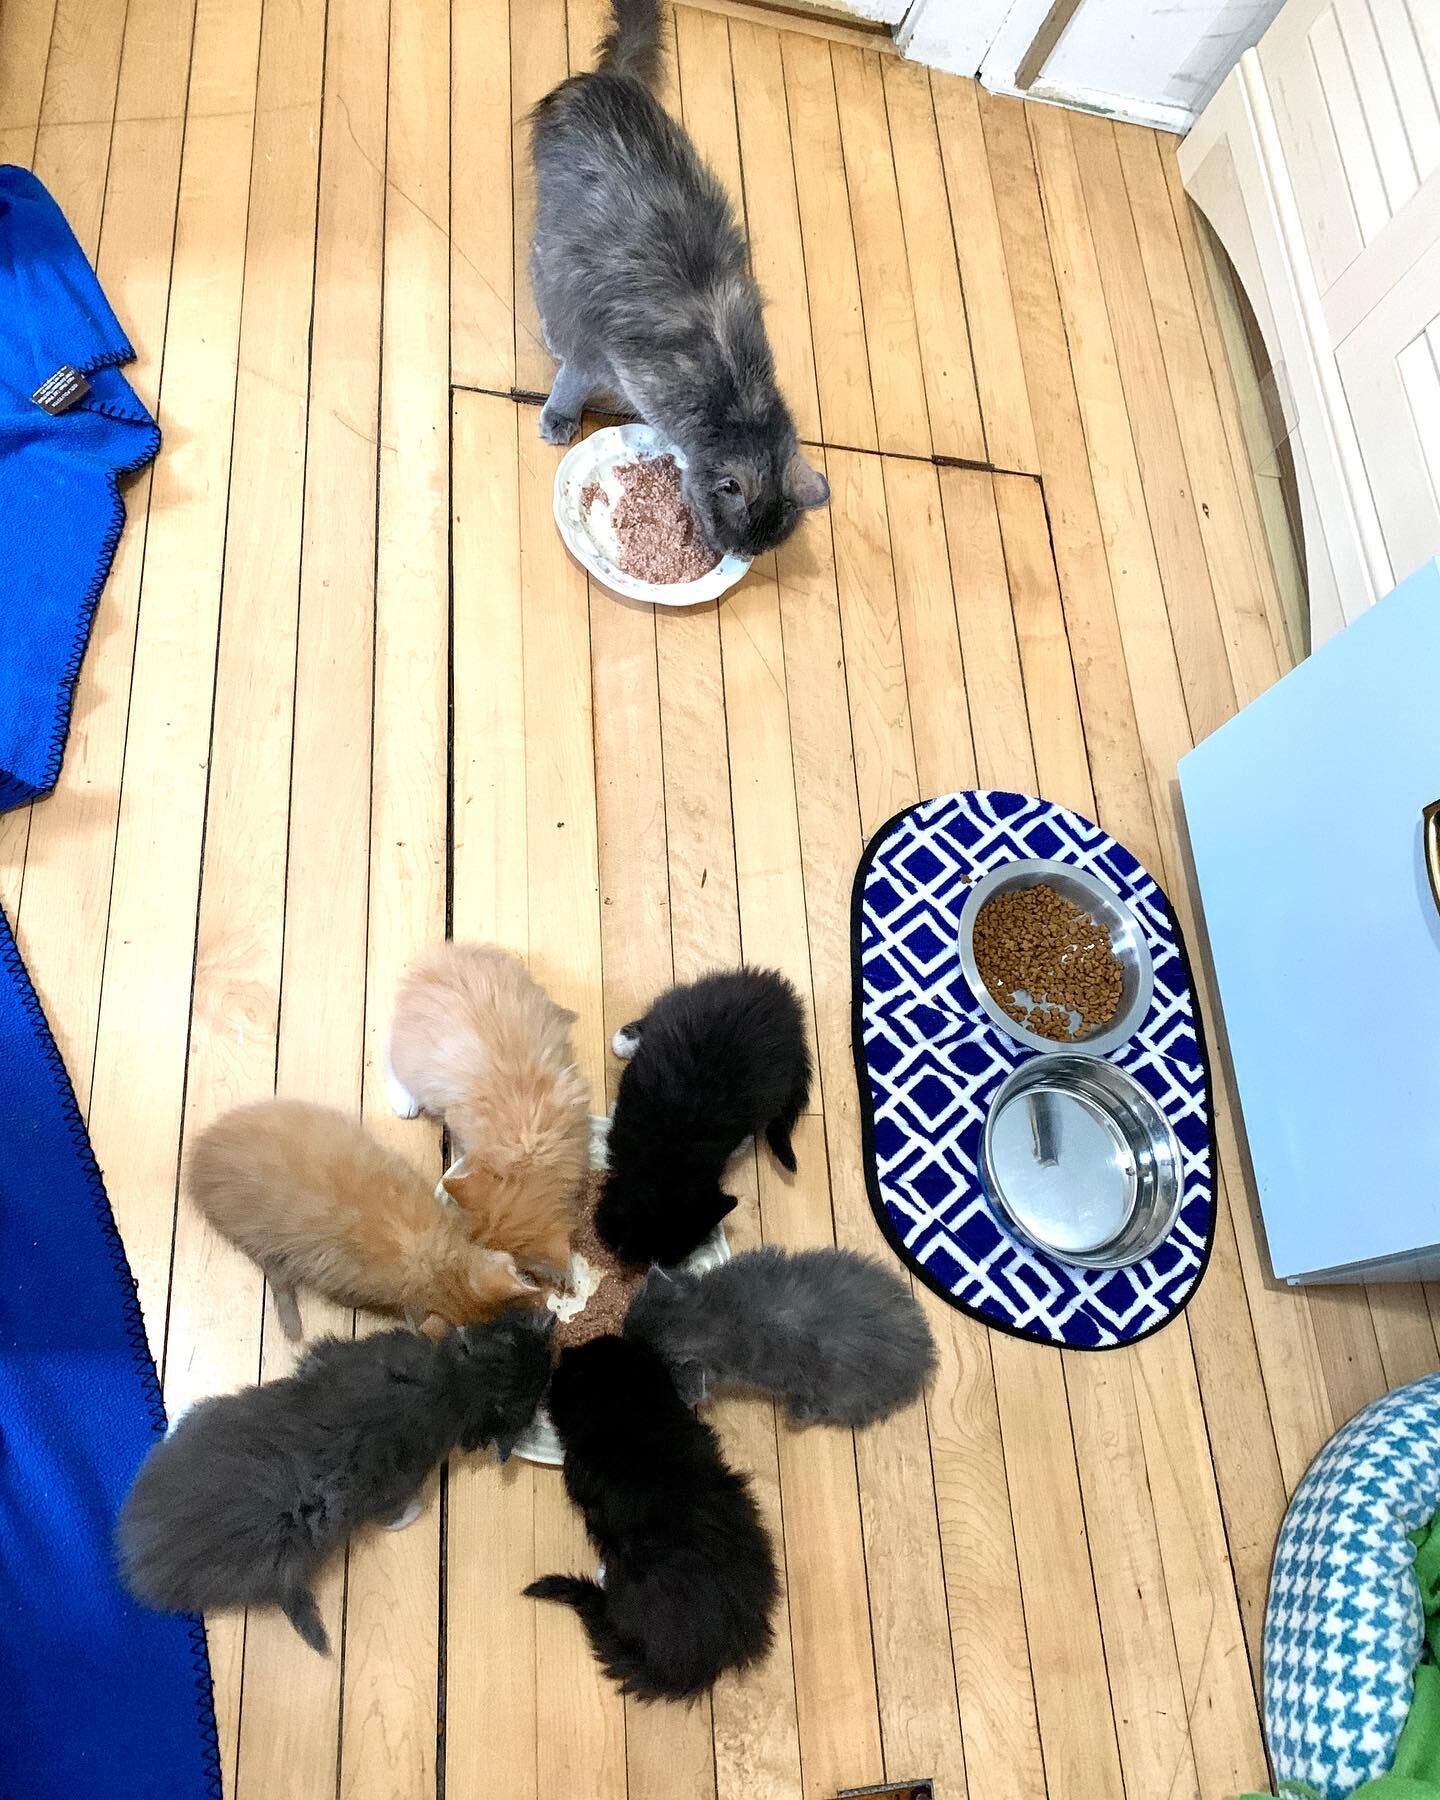 When you have a large litter of kittens the good thing is, there are lots of kittens to entertain each other; they don&rsquo;t require as much hands on time, making managing a full time job and other responsibilities easier. The bad thing is, they do